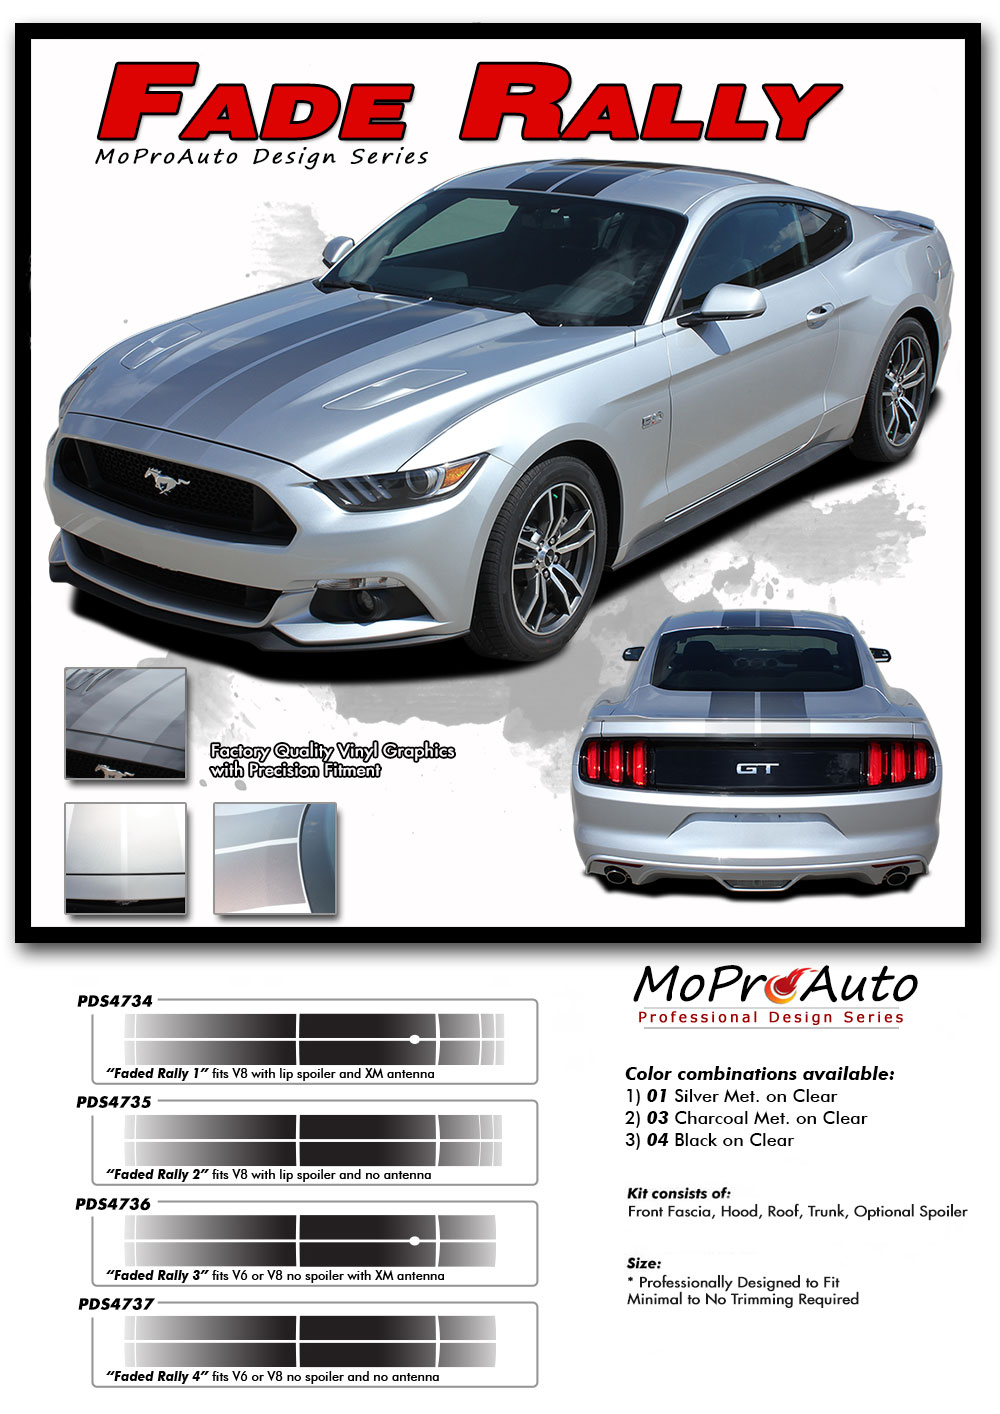 Ford Mustang Fade Rally Faded Racing Stripes Ebony Racing Striping Silver Vinyl Graphics Decals